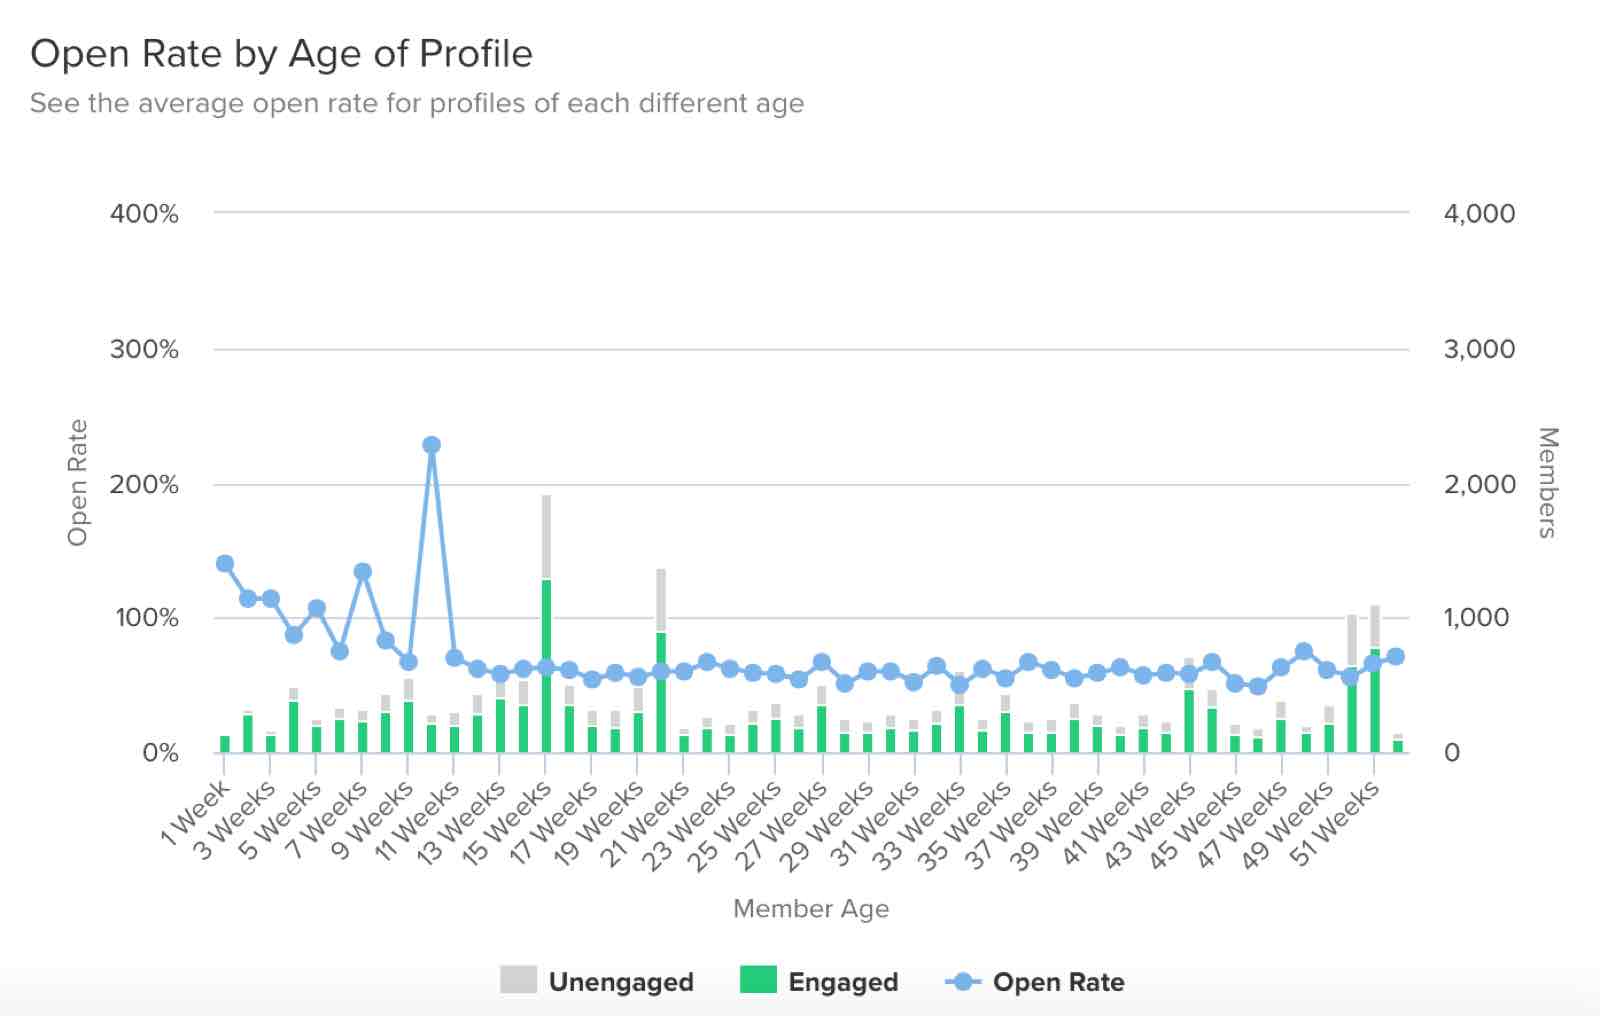 Open rates for engaged and unengaged profiles based on each profile's age